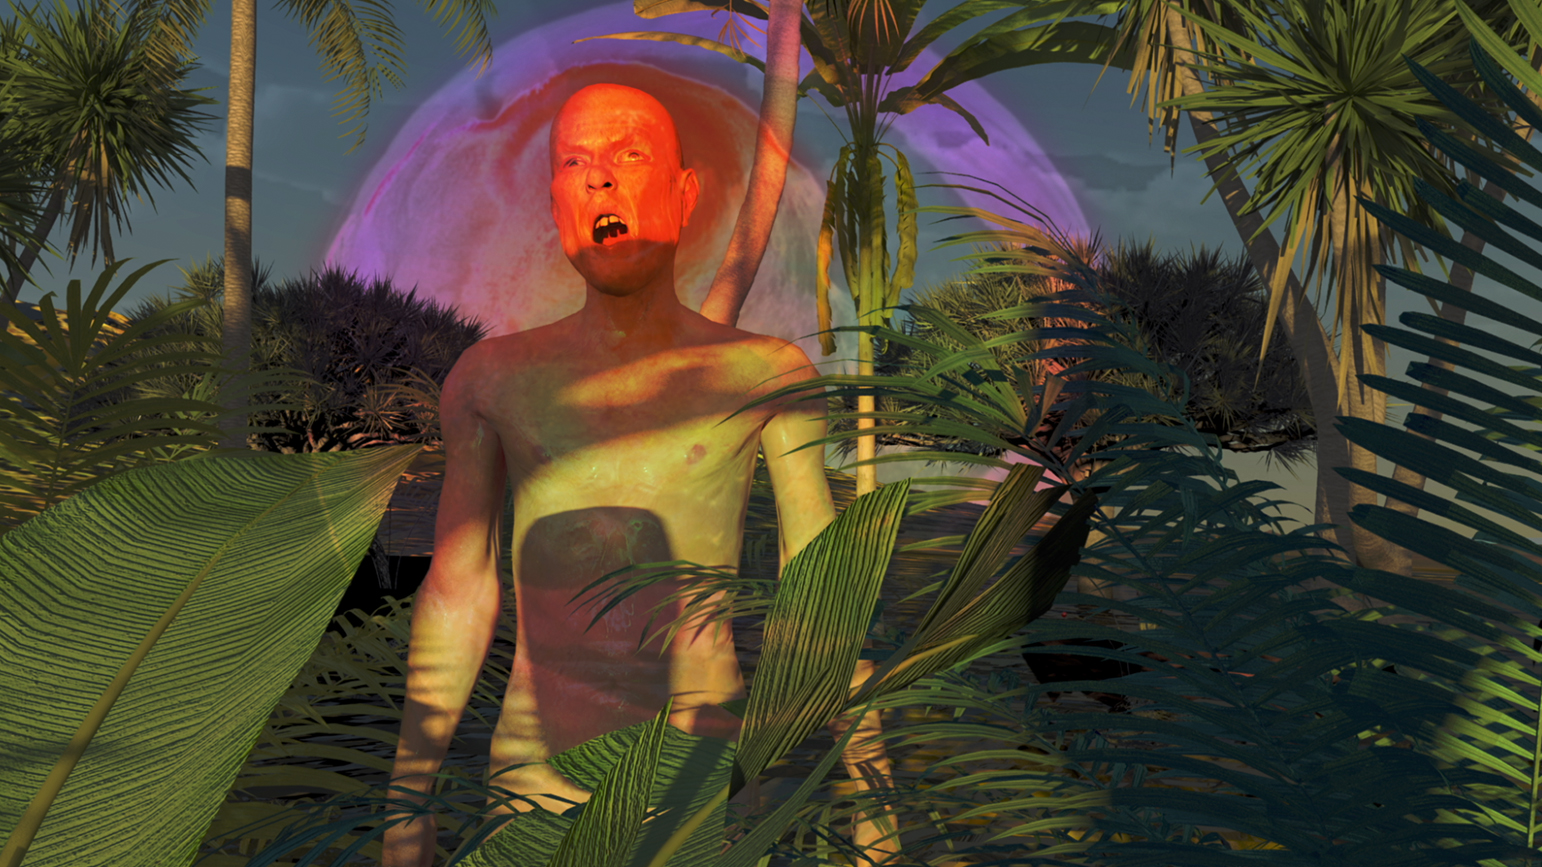 Digitally created image of a figure standing in a jungle with his mouth open at sunset or sunrise